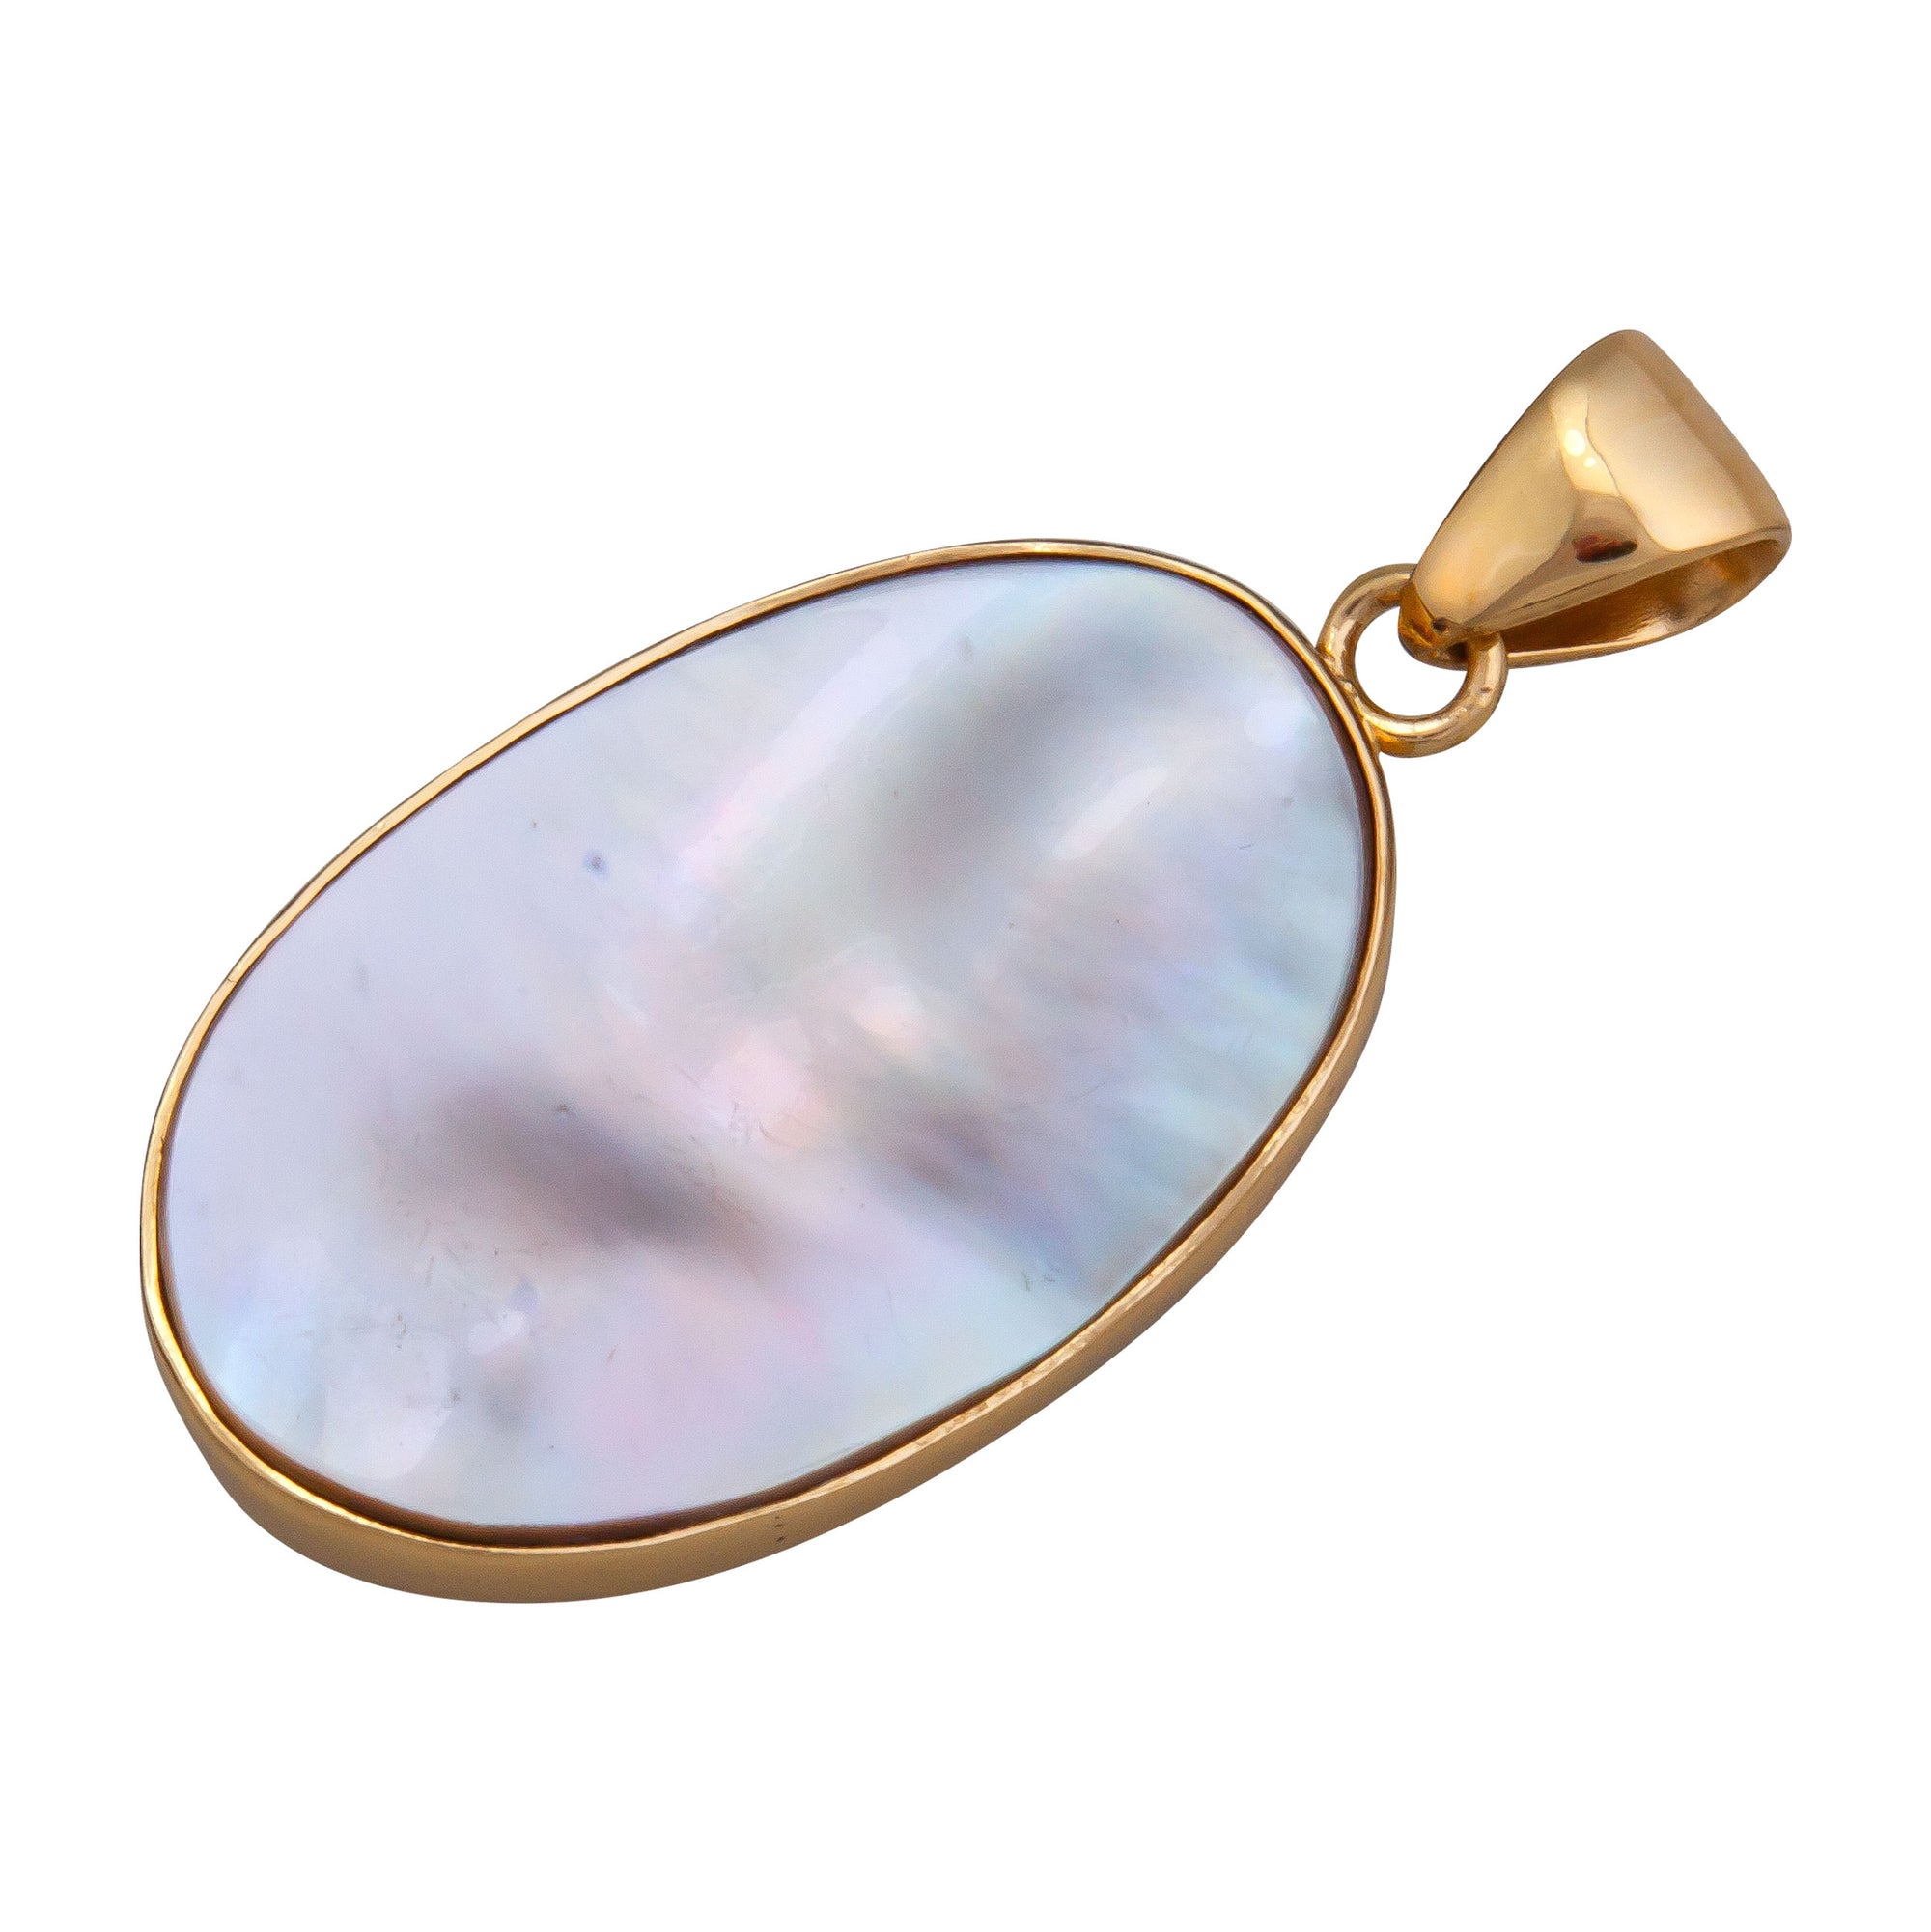 Alchemia Mabe Blister Pearl Pendant | Charles Albert Jewelry